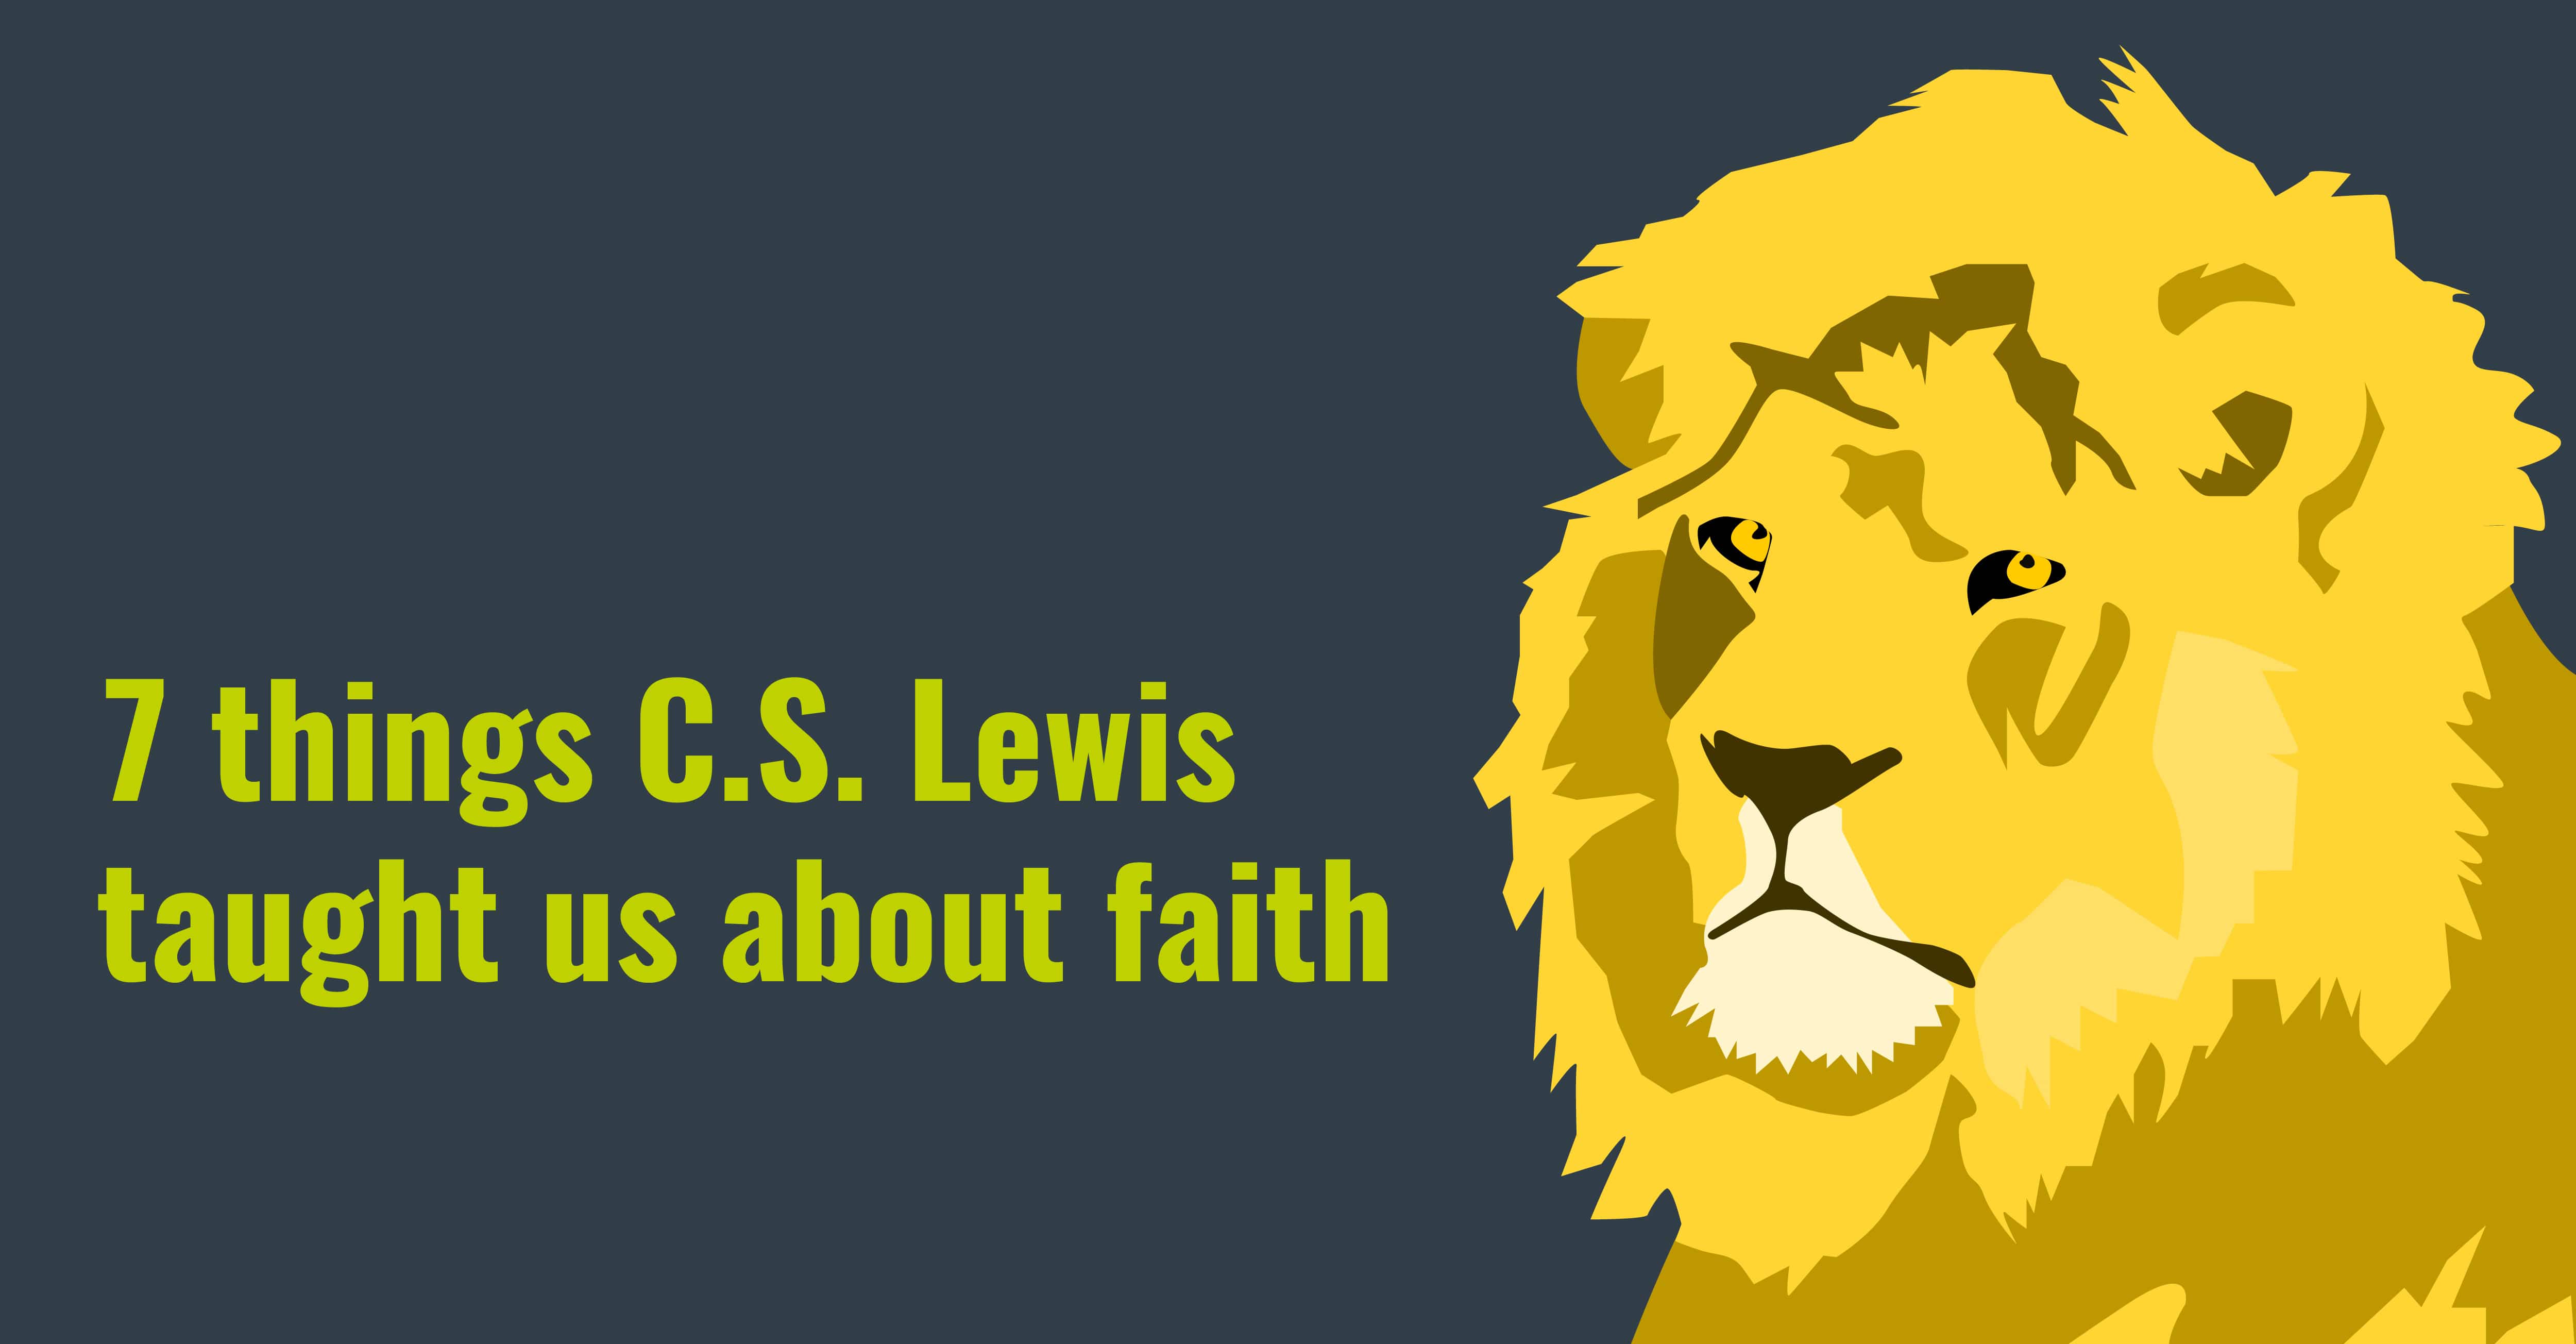 7 things C.S. Lewis Taught Us About Faith